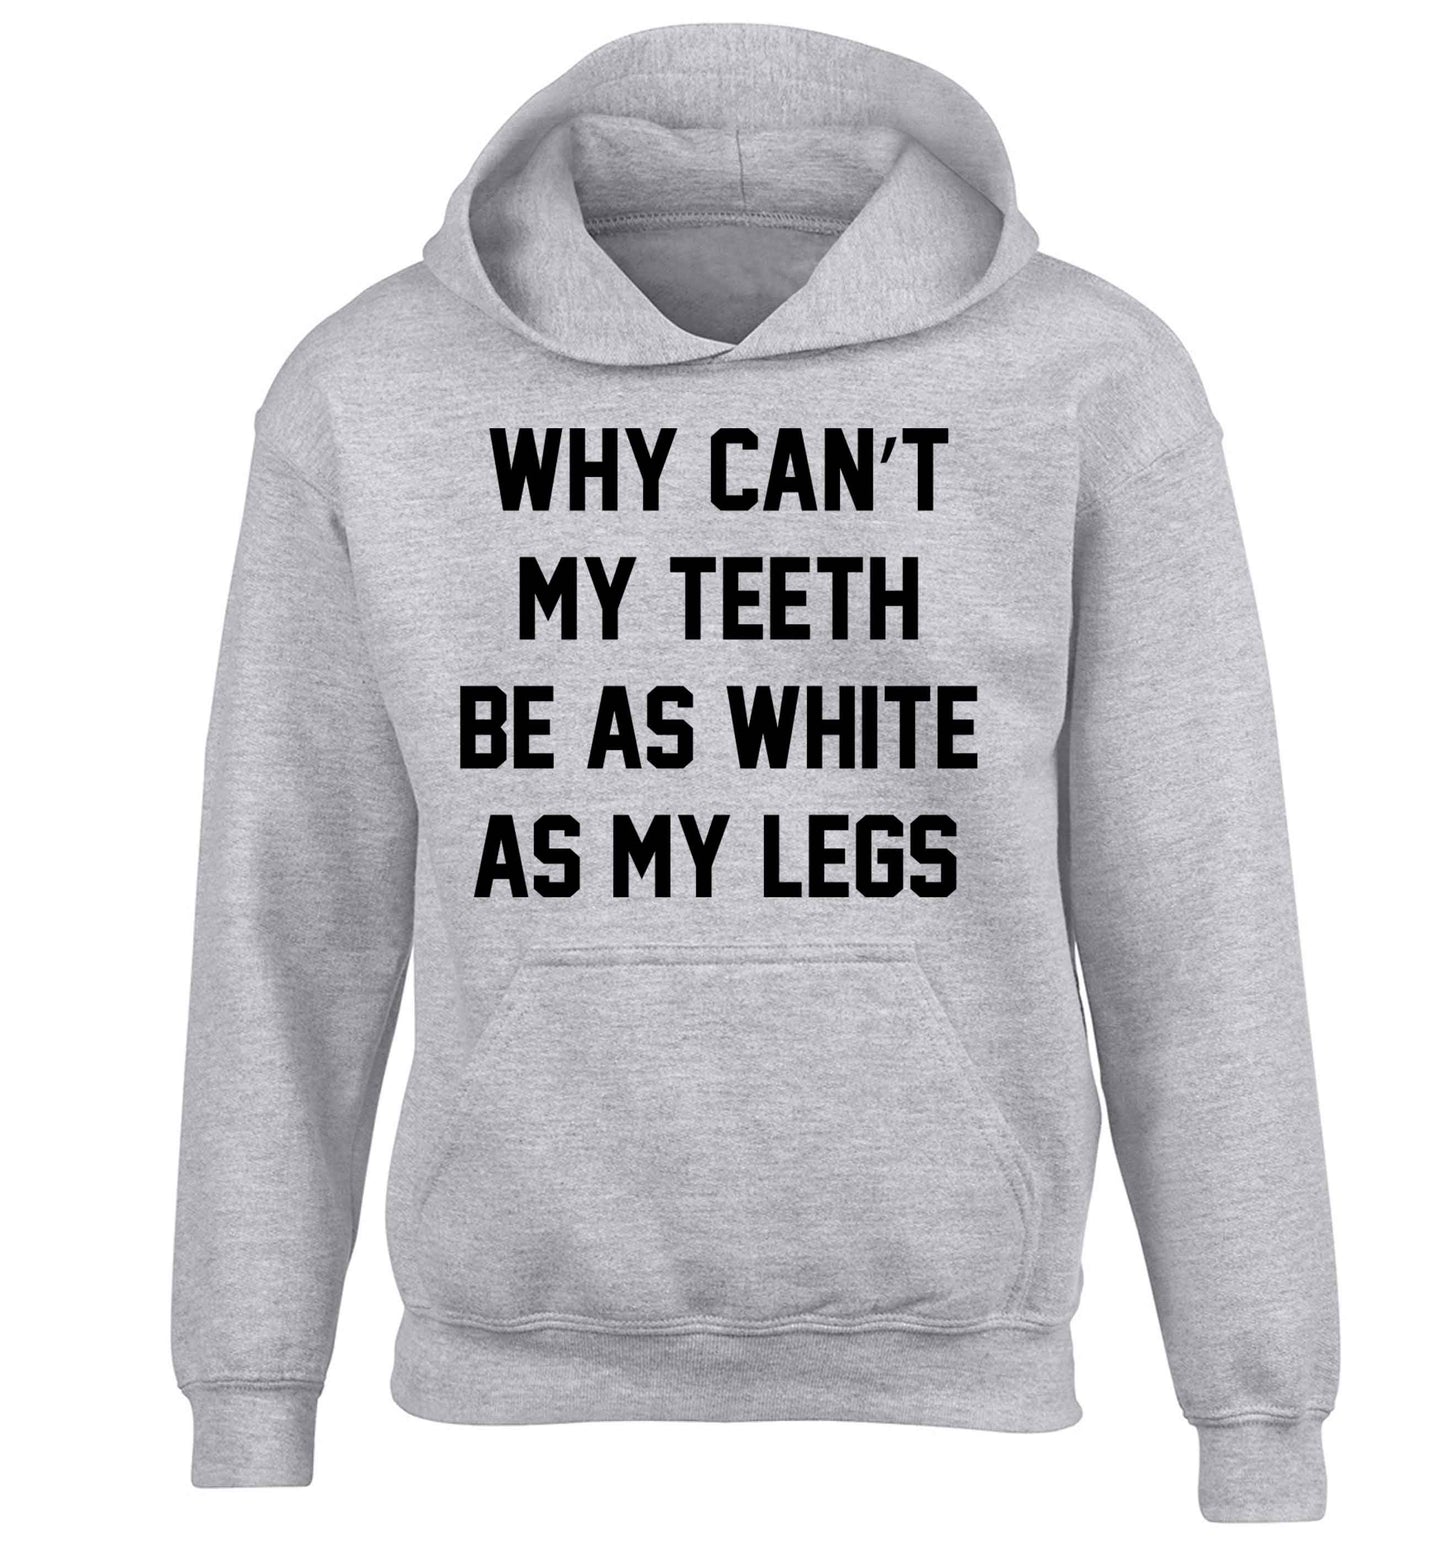 Why can't my teeth be as white as my legs children's grey hoodie 12-13 Years